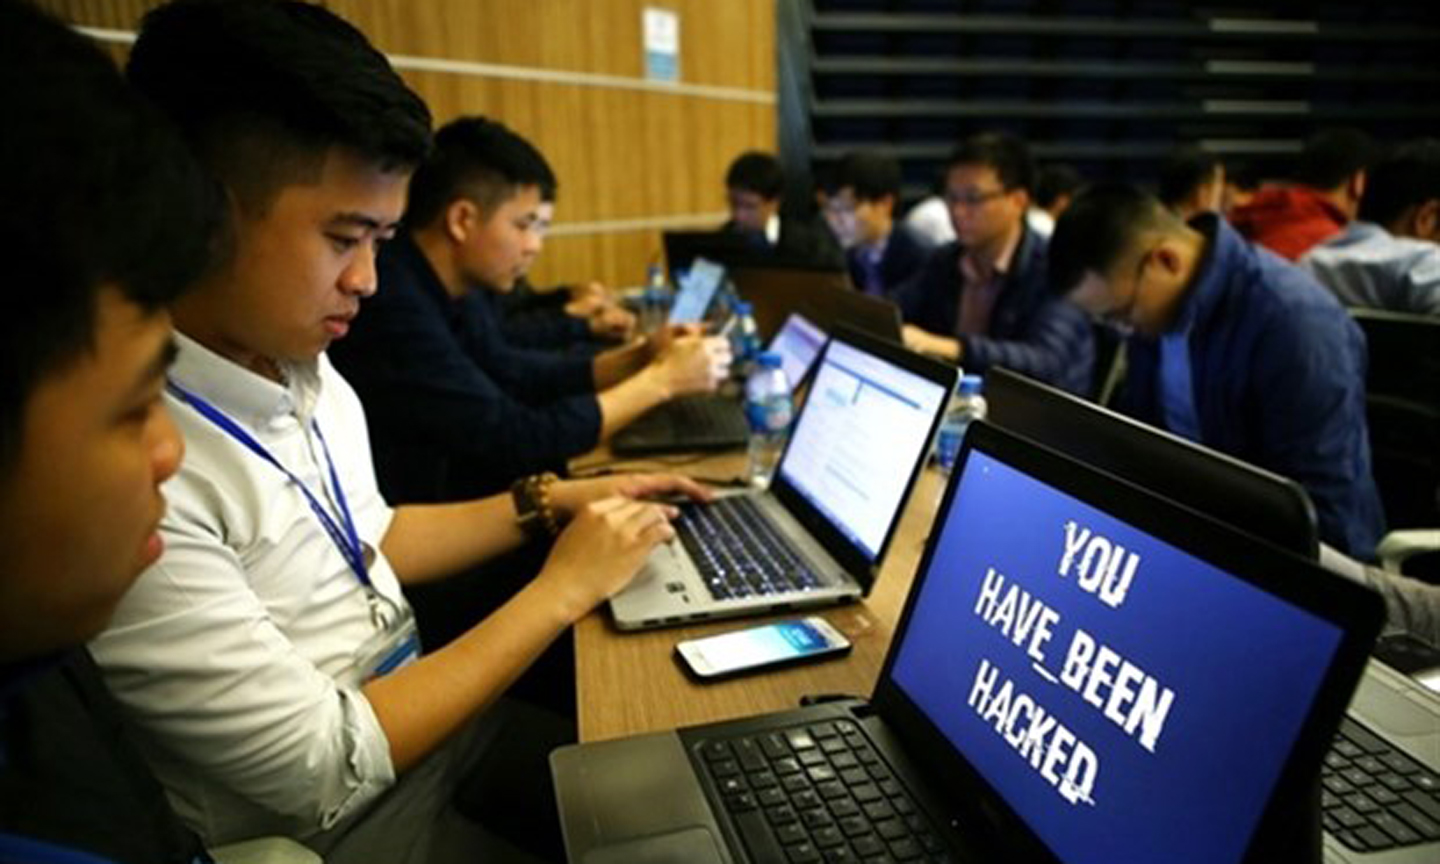  Participants at a cyber security drill in 2018 held by the Việt Nam Computer Emergency Response Team (VNCERT). (Photo: VNA)